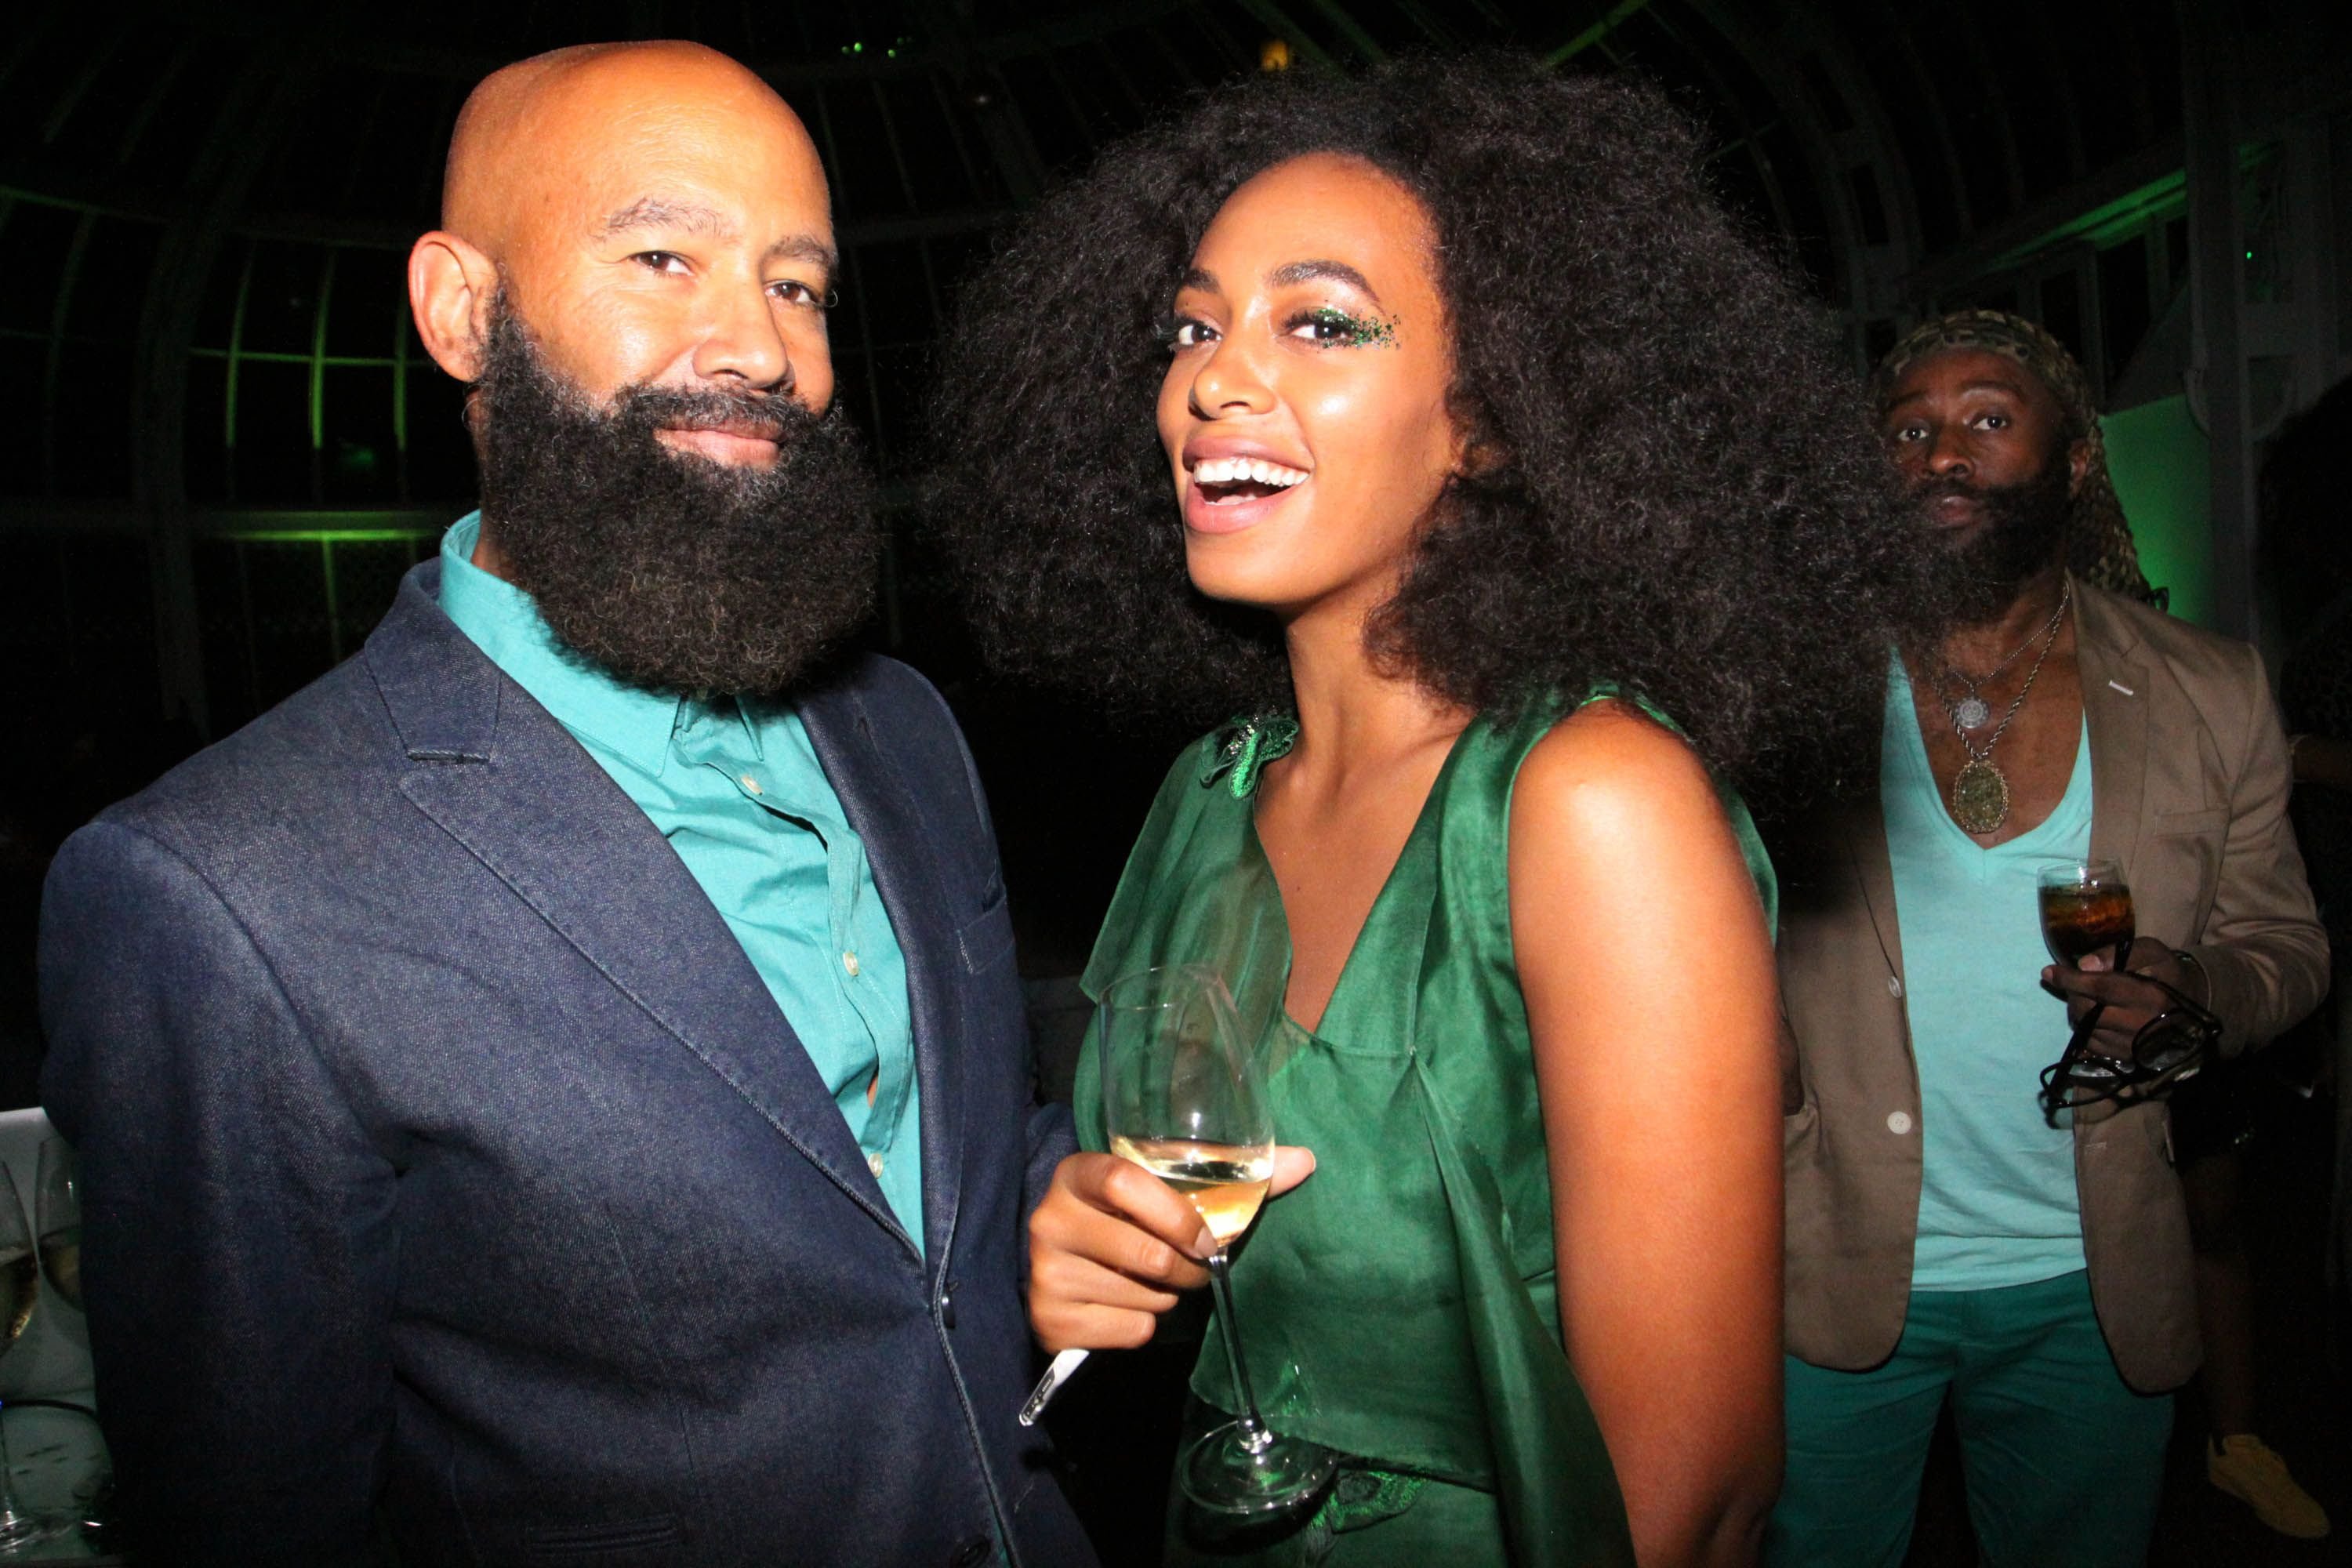 Solange Knowles and Alan Ferguson during the "You've Got To Be Seen Green!" party hosted by Solange Knowles at the Brooklyn Botanical Gardens on September 15, 2015 in Brooklyn, New York. | Source: Getty Images